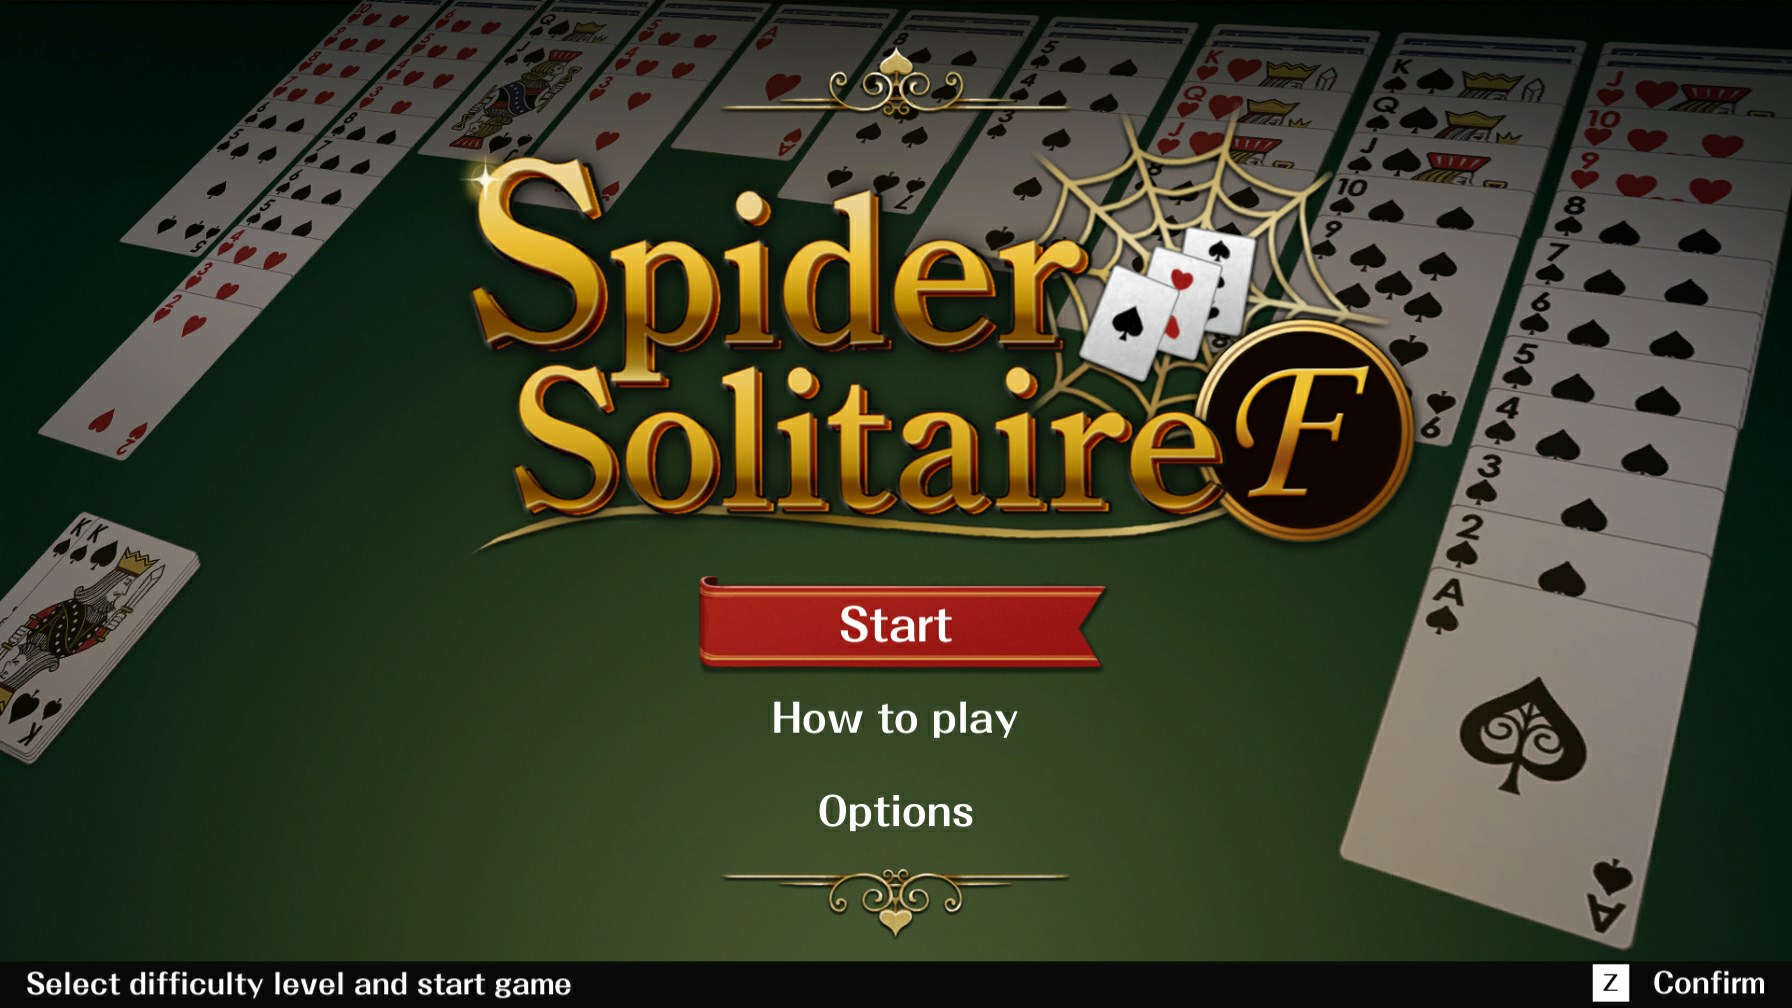 Play The Entertaining Spider Solitaire Classic Game on PC